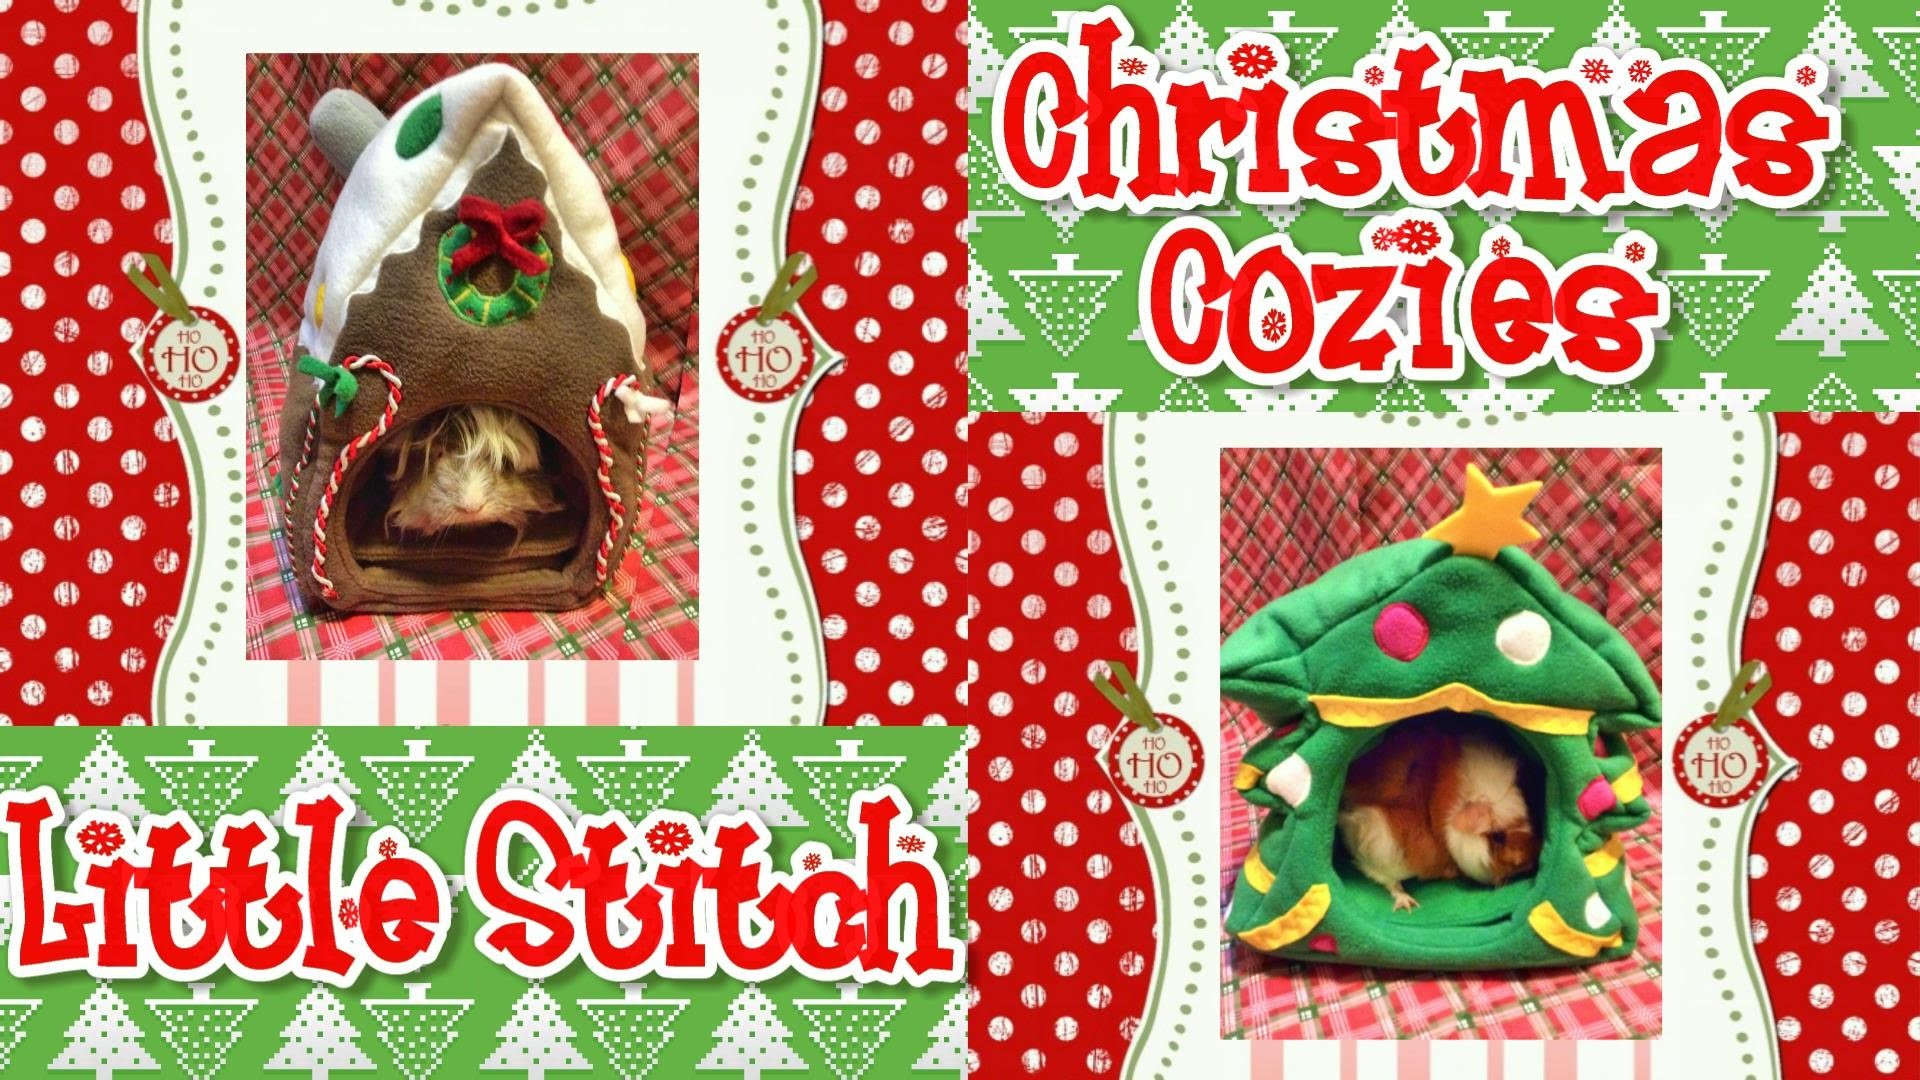 1920x1080 Christmas Cozies from Little Stitch! (Guinea Pig)